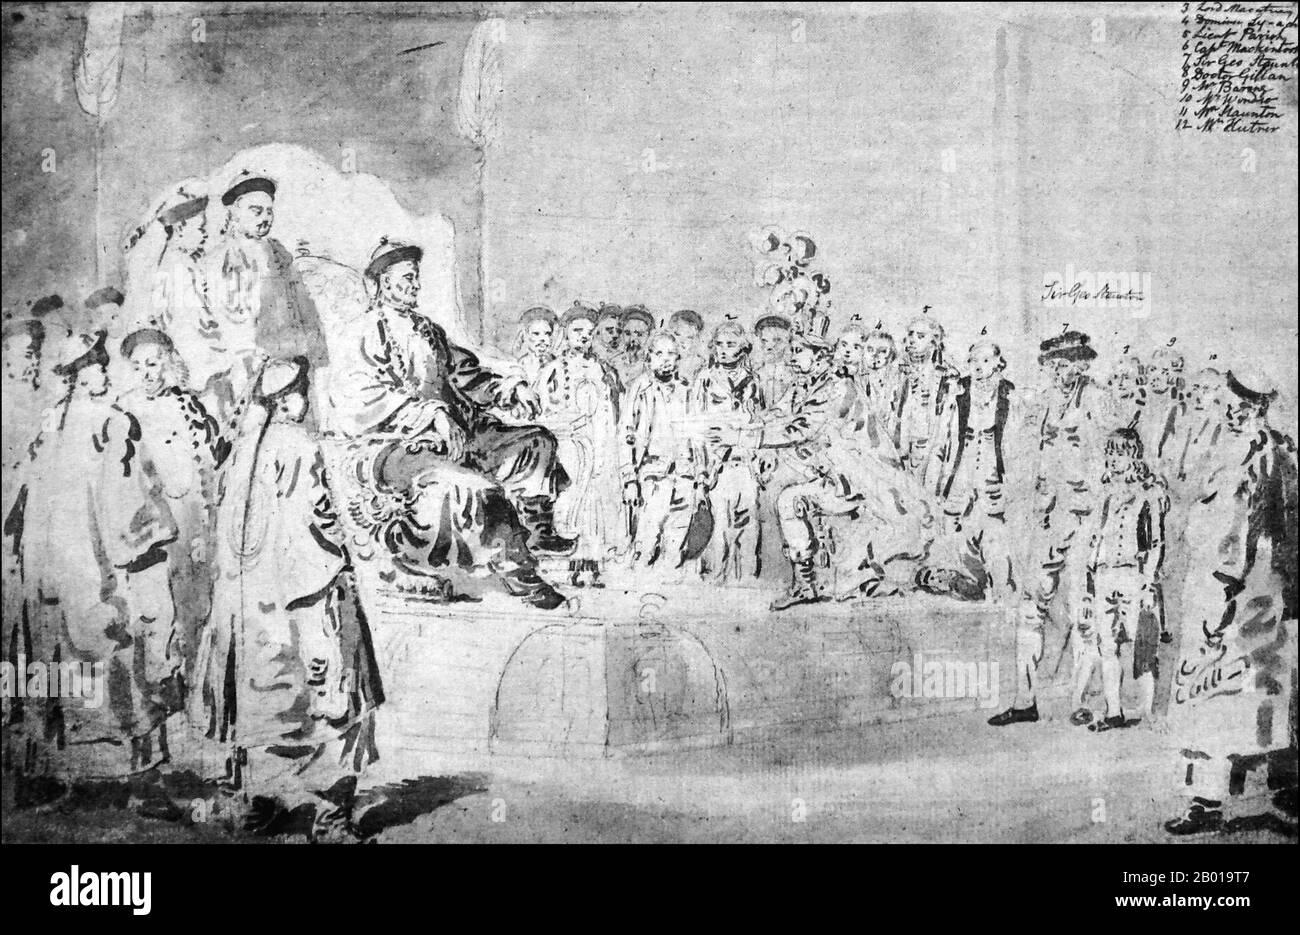 China: The Macartney Embassy to China. The Qianlong Emperor receives a missive from the kneeling Lord Macartney. Sketch by William Alexander (1767-1816), 1793.  The Macartney Embassy, also called the Macartney Mission, was a British embassy to China in 1793. It is named for the first envoy of Great Britain to China, George Macartney, who led the endeavour. The goal of the embassy was to convince the Qianlong Emperor to ease restrictions on trade between Great Britain and China.  The embassy was ultimately not successful, a result of competing world views which were incompatible. Stock Photo